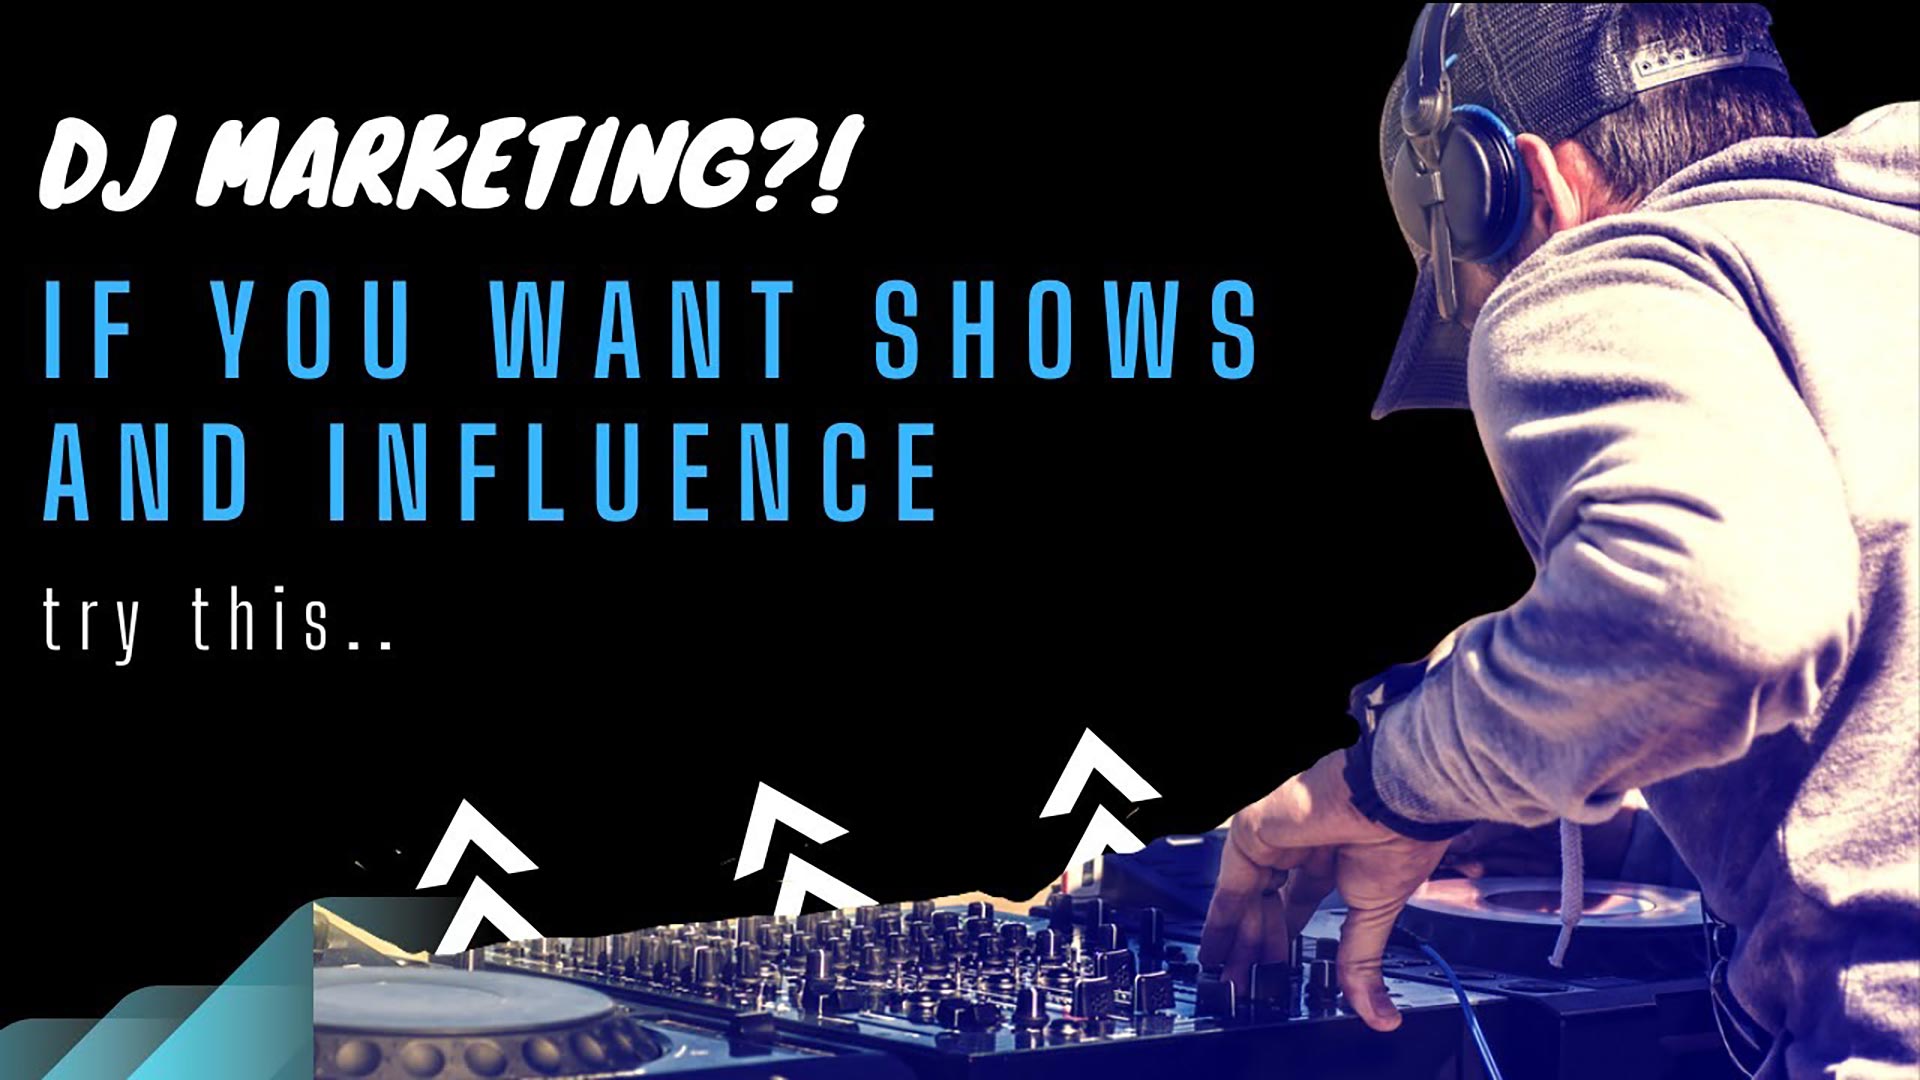 DJ MARKETING - WANT DJ GIGS AND INFLUENCE, DO THIS INSTEAD!! Image